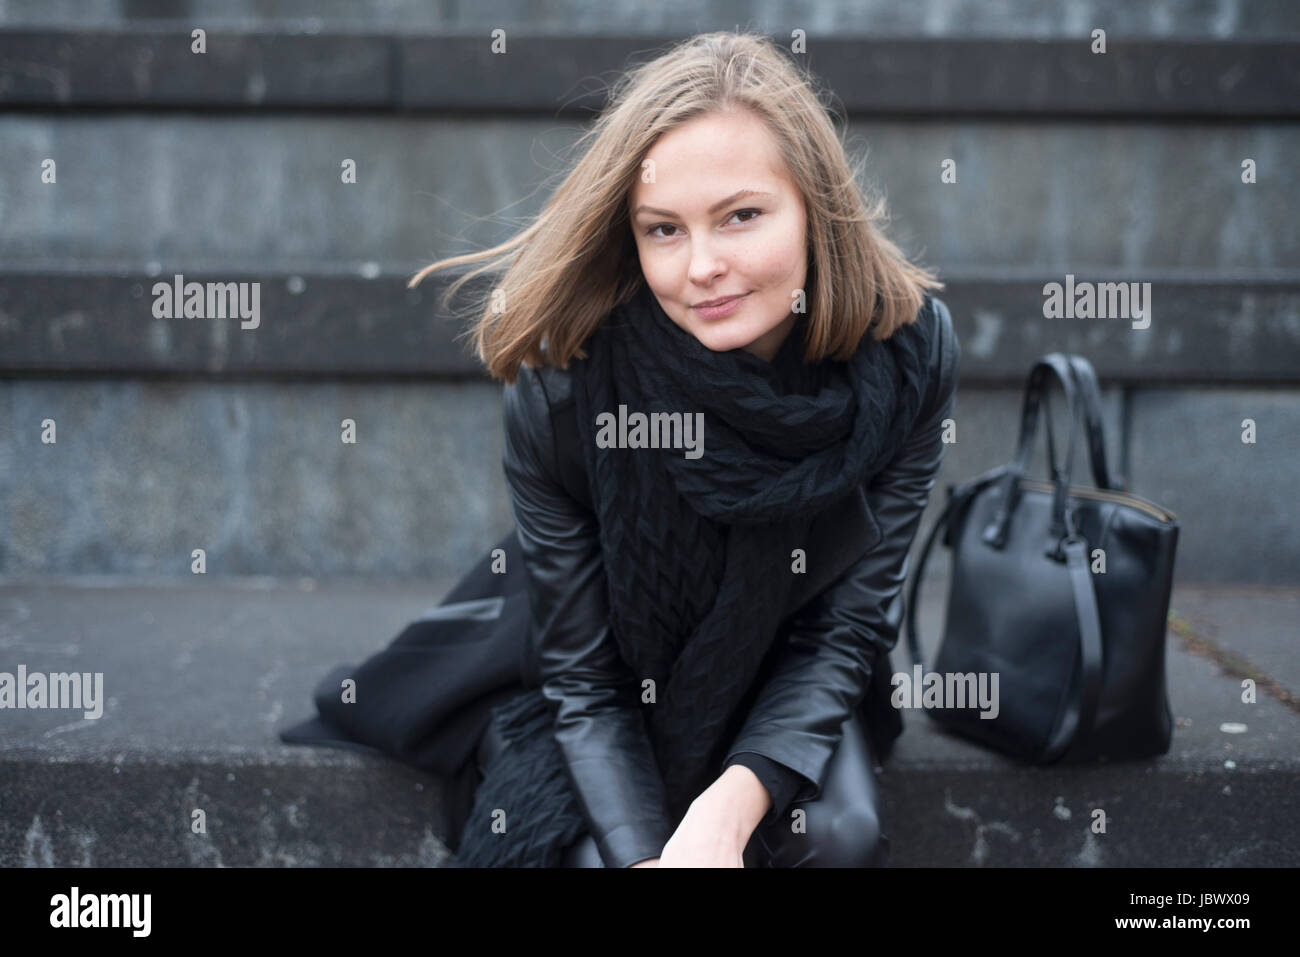 Portrait of young woman in black sitting on wall in city Stock Photo